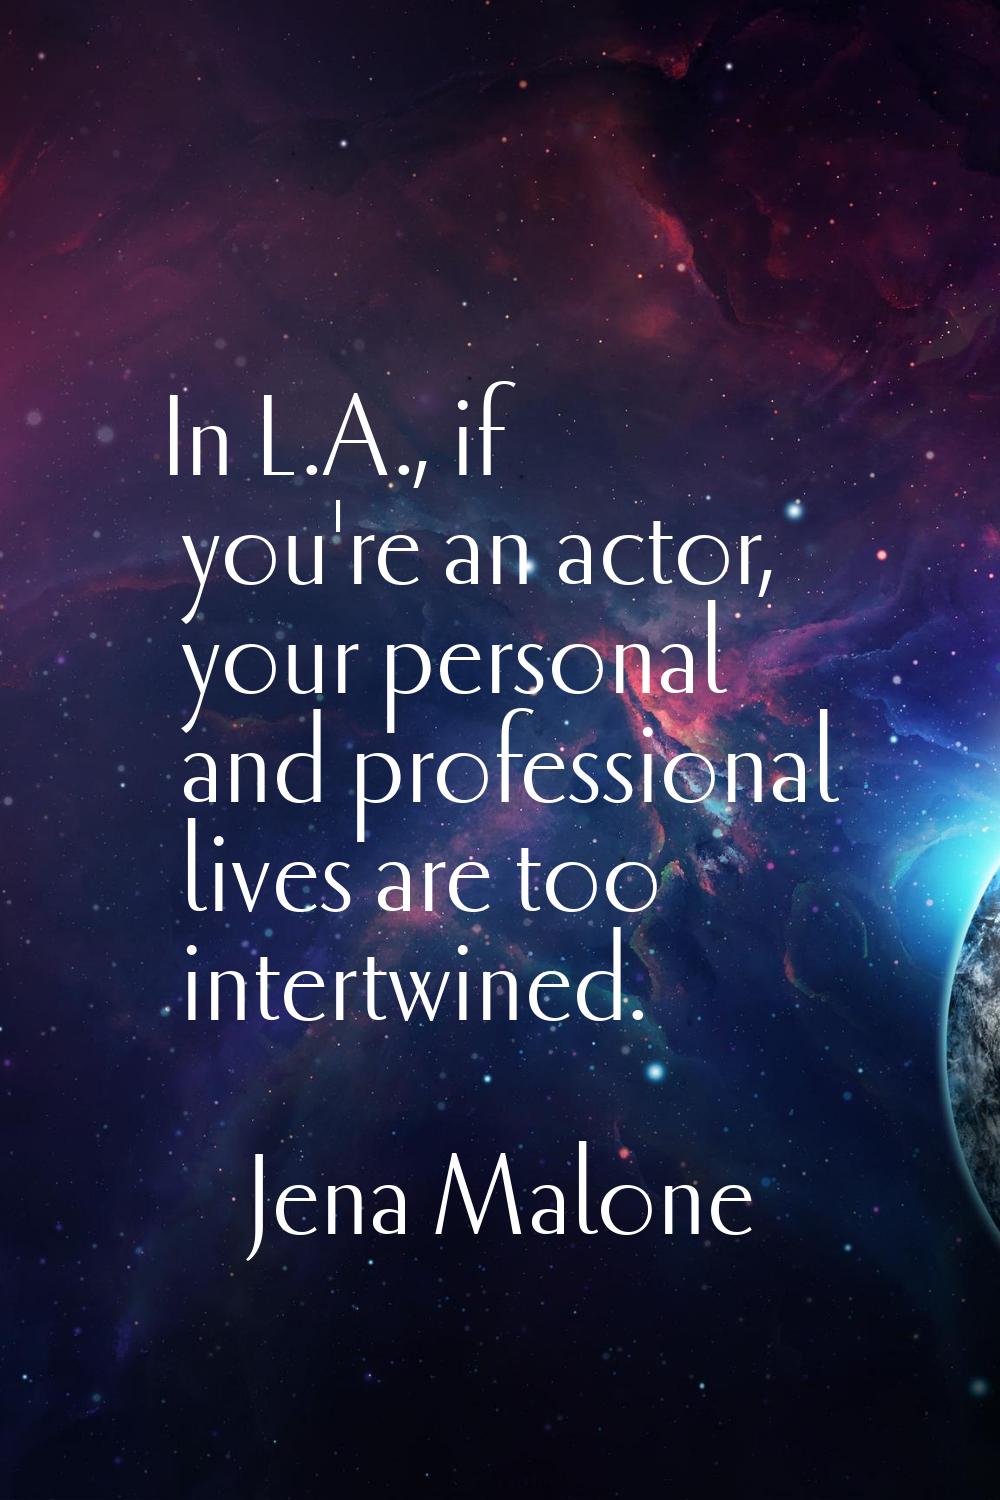 In L.A., if you're an actor, your personal and professional lives are too intertwined.